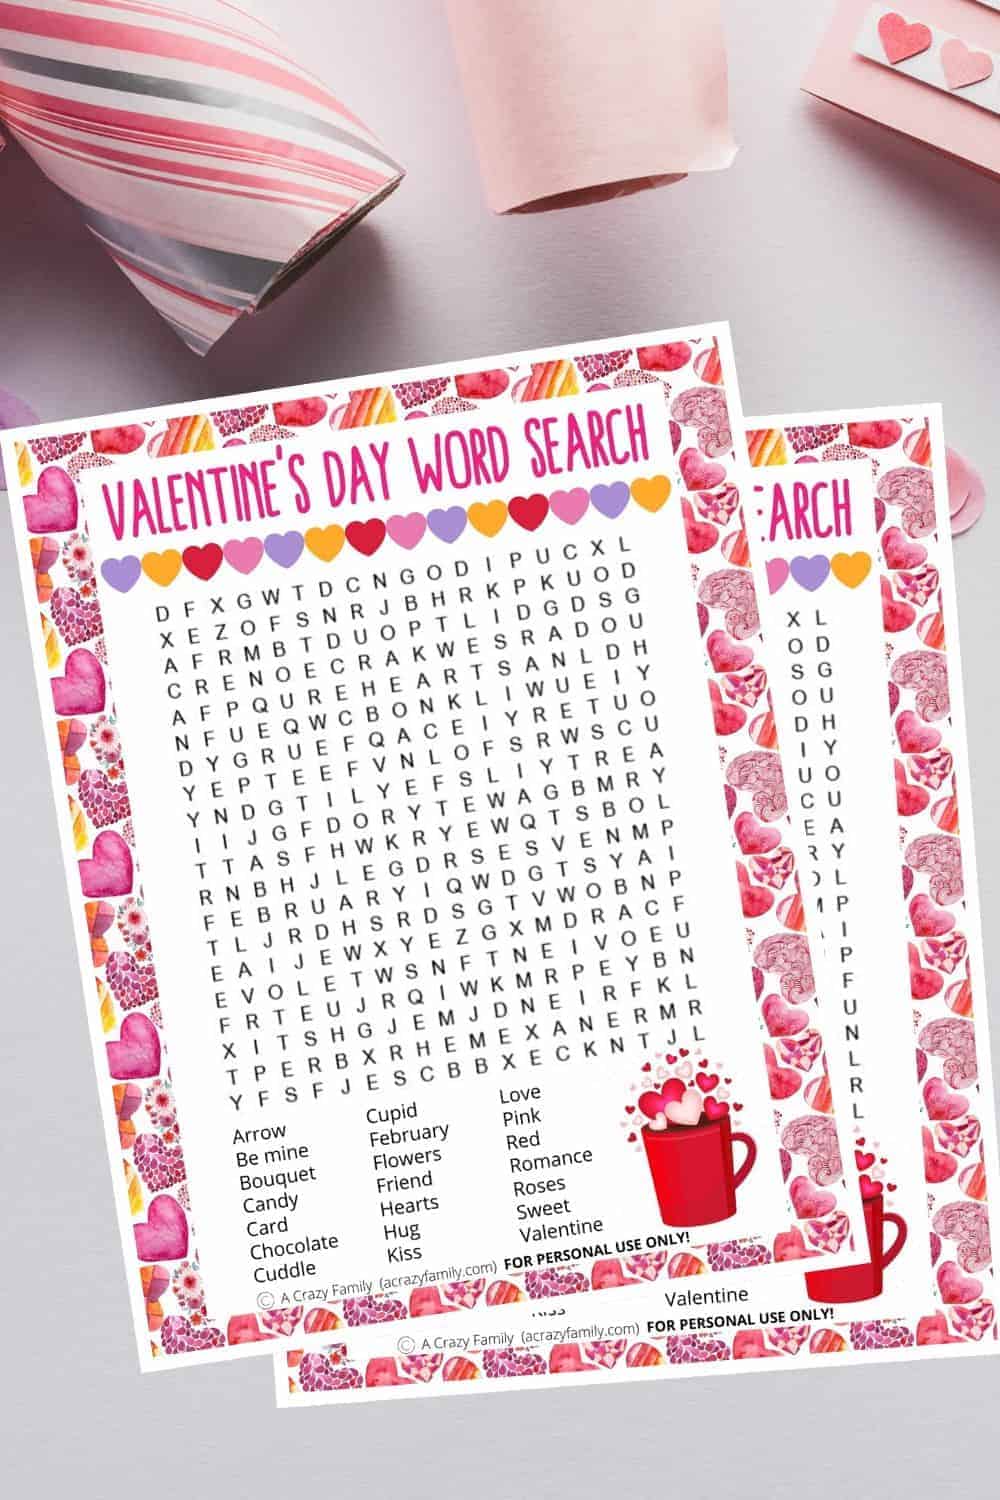 Valentine’s Day Word Search Printable